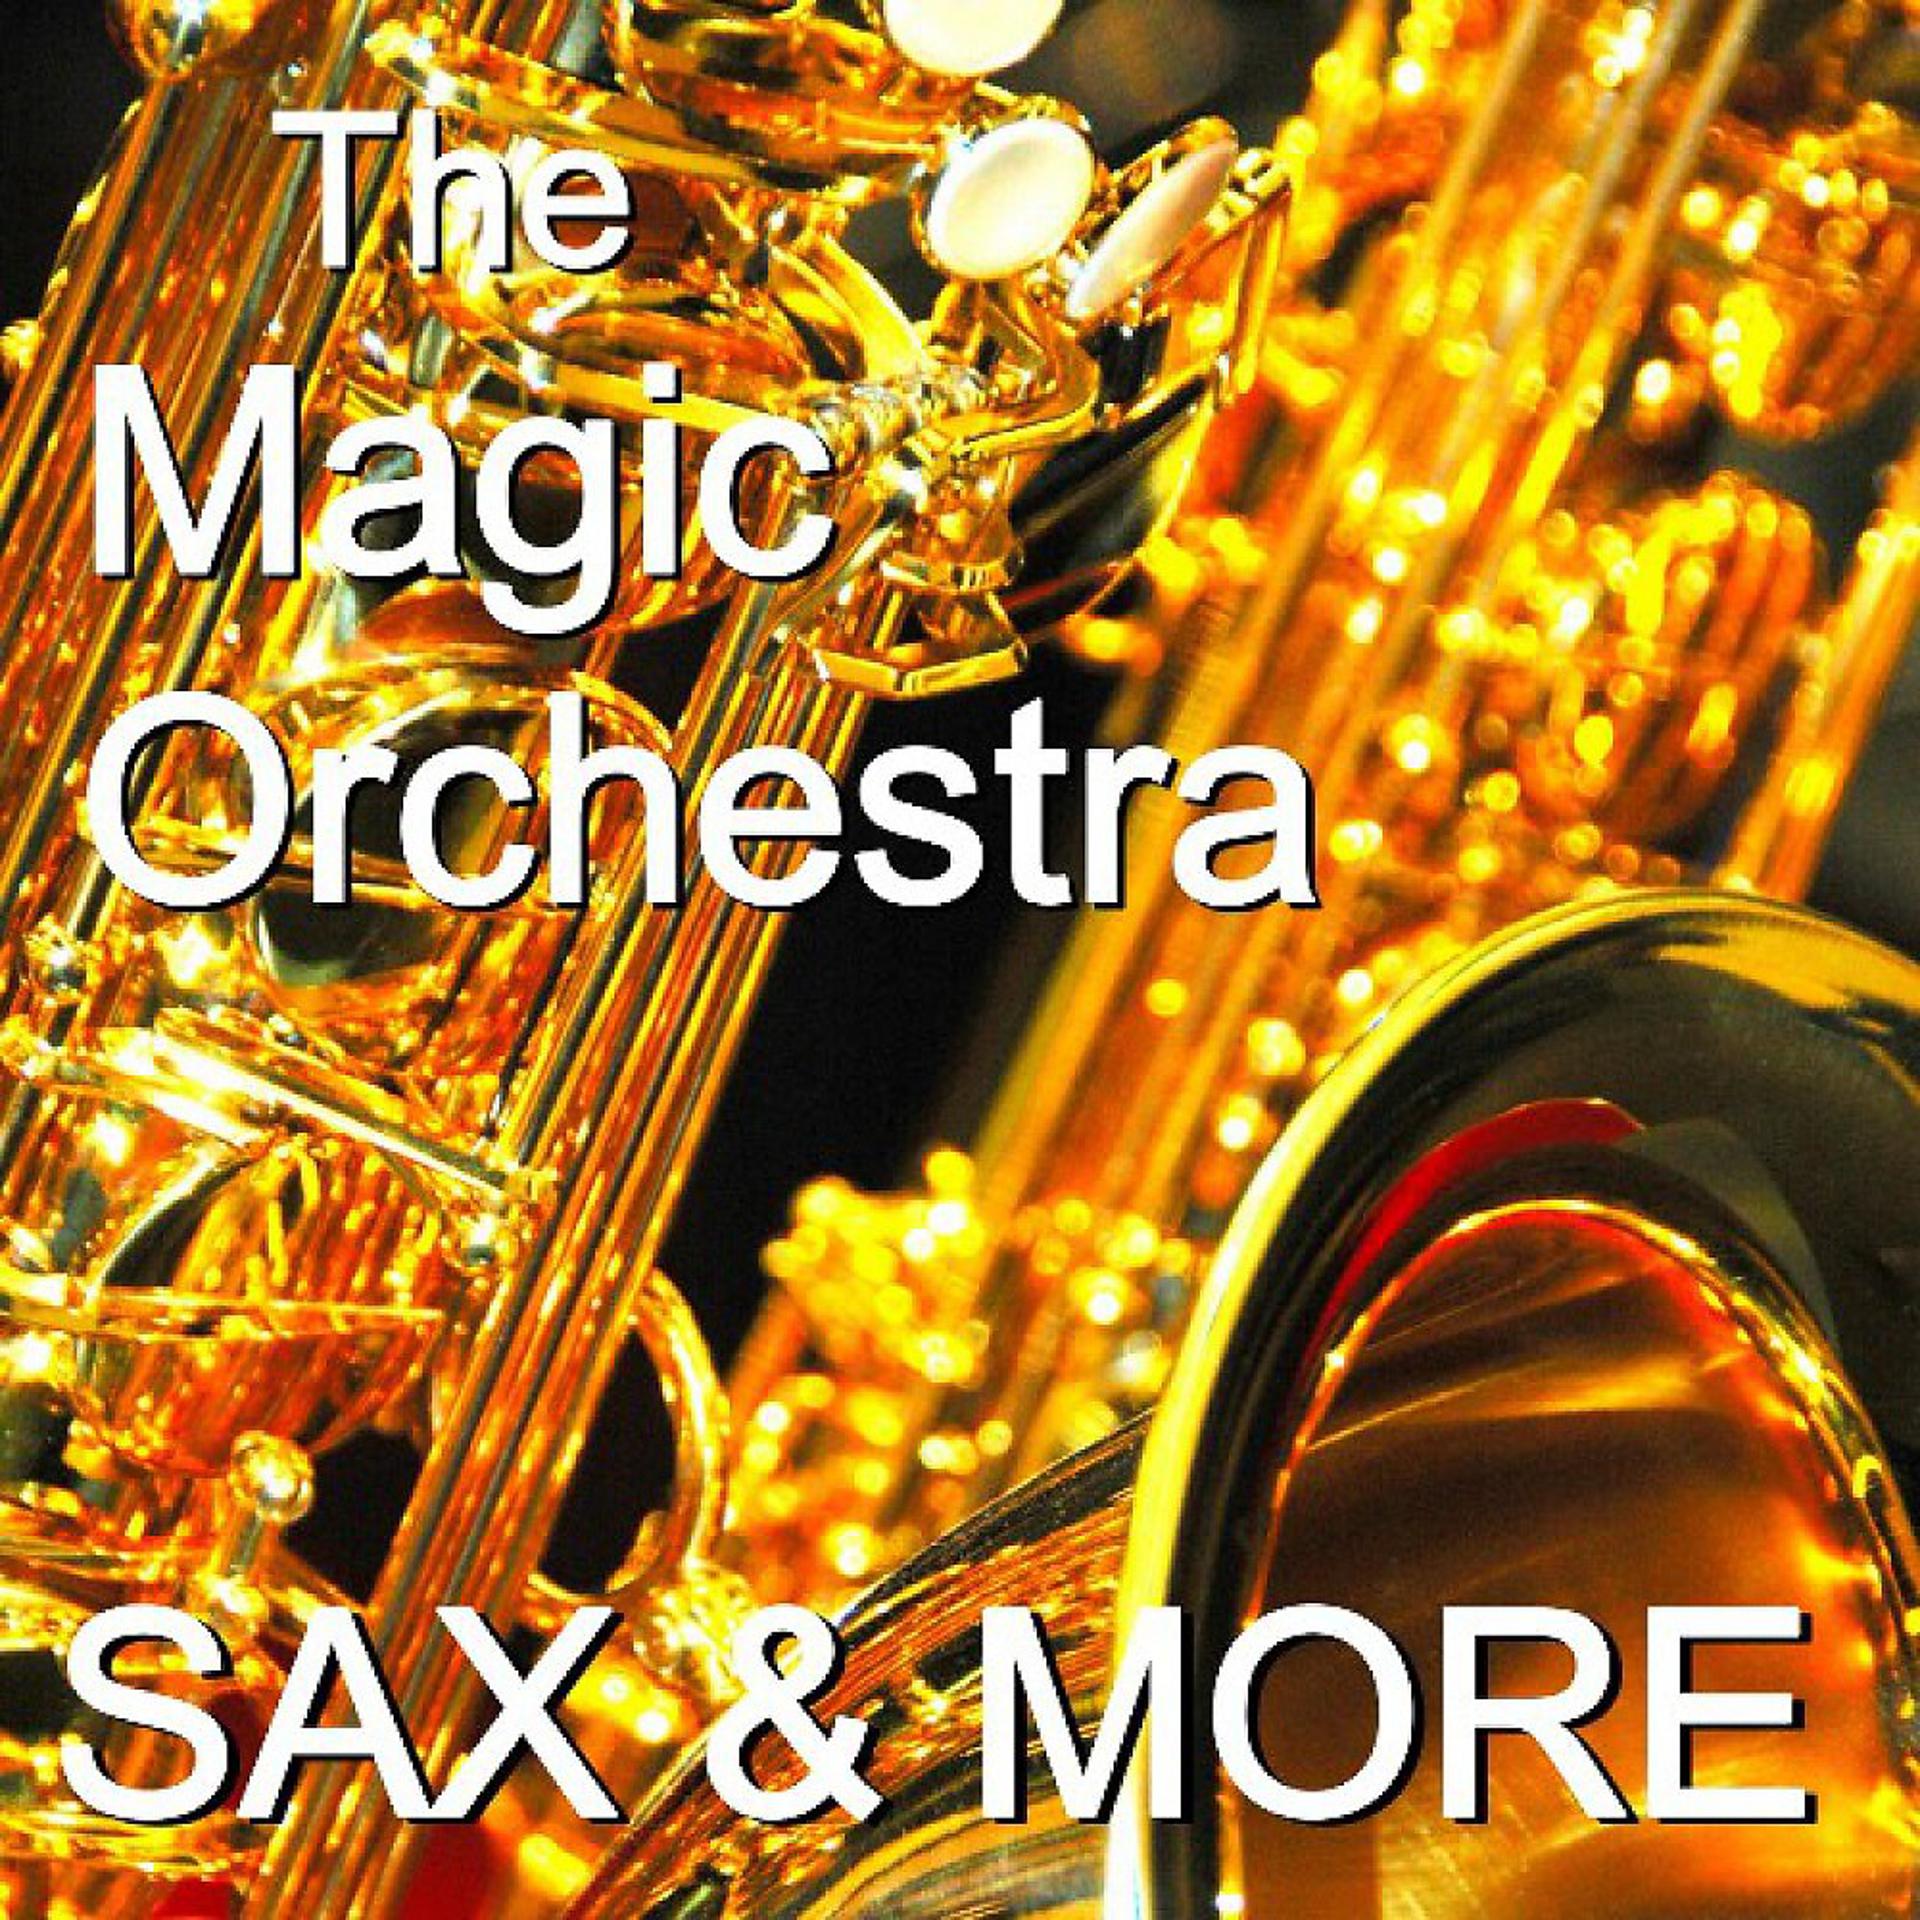 Magic orchestra. The Magic Orchestra. Сексофон. The Gold Magic Orchestra. The Magic Orchestra Saxophone for lover's.